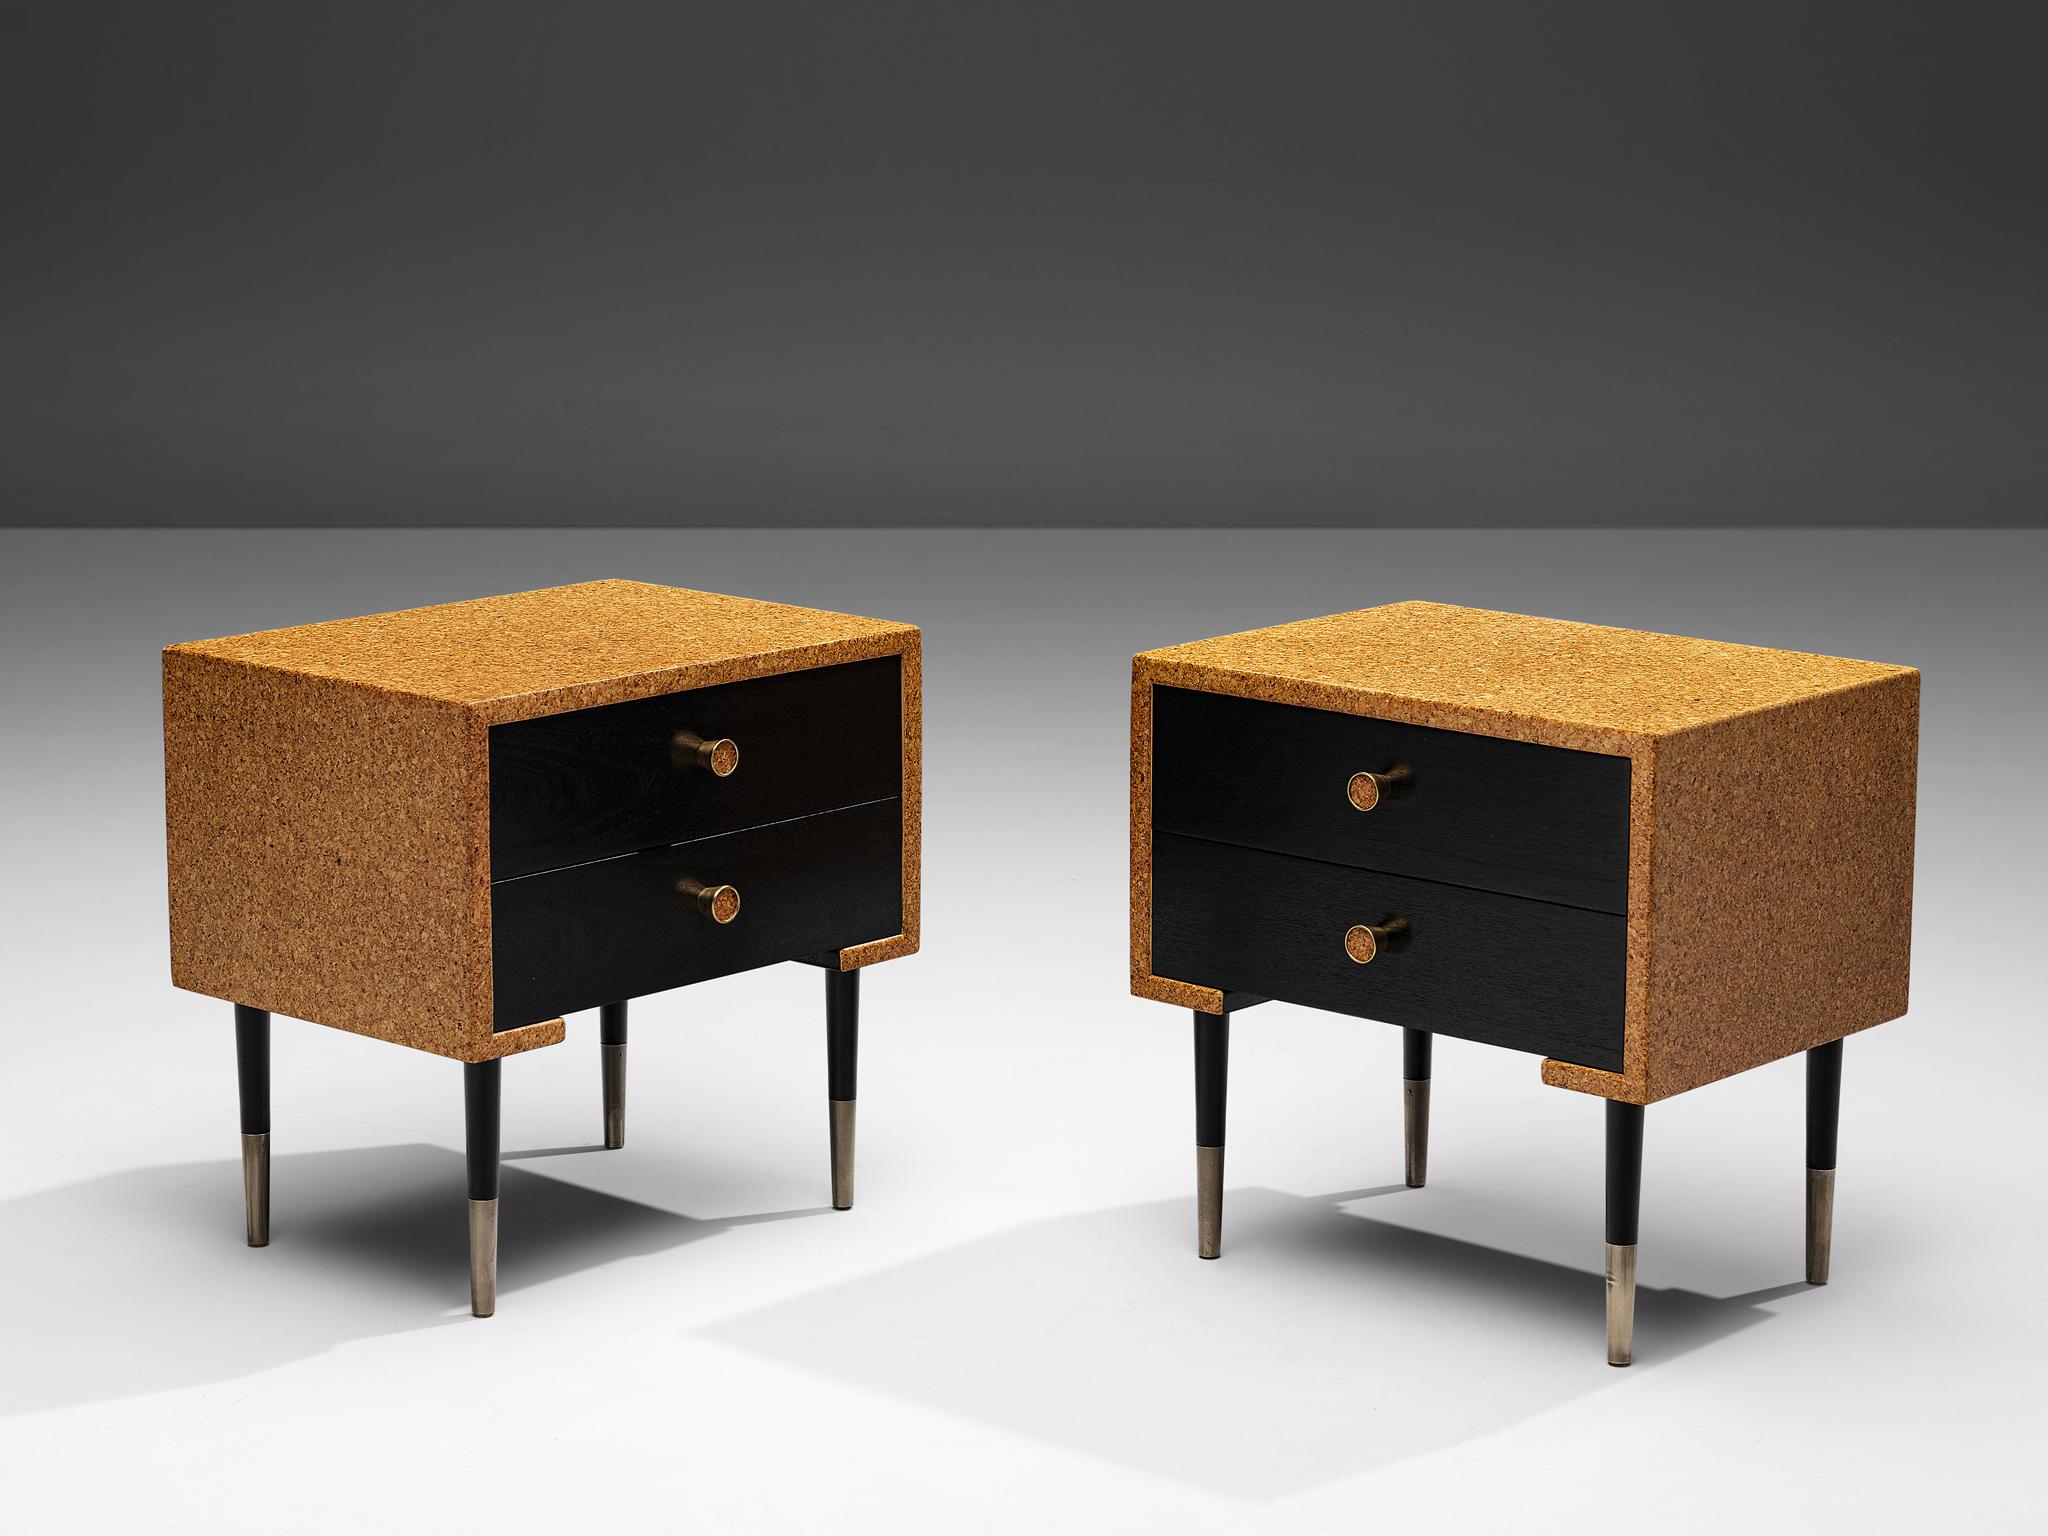 Paul Frankl for Johnson Furniture, pair of nightstands, cork, wood, metal, brass, United States, 1950s

This pair of nightstands was designed by Paul Frankl in the 1950s. The cubic shape of the top with two drawers rests on tapered metal legs with